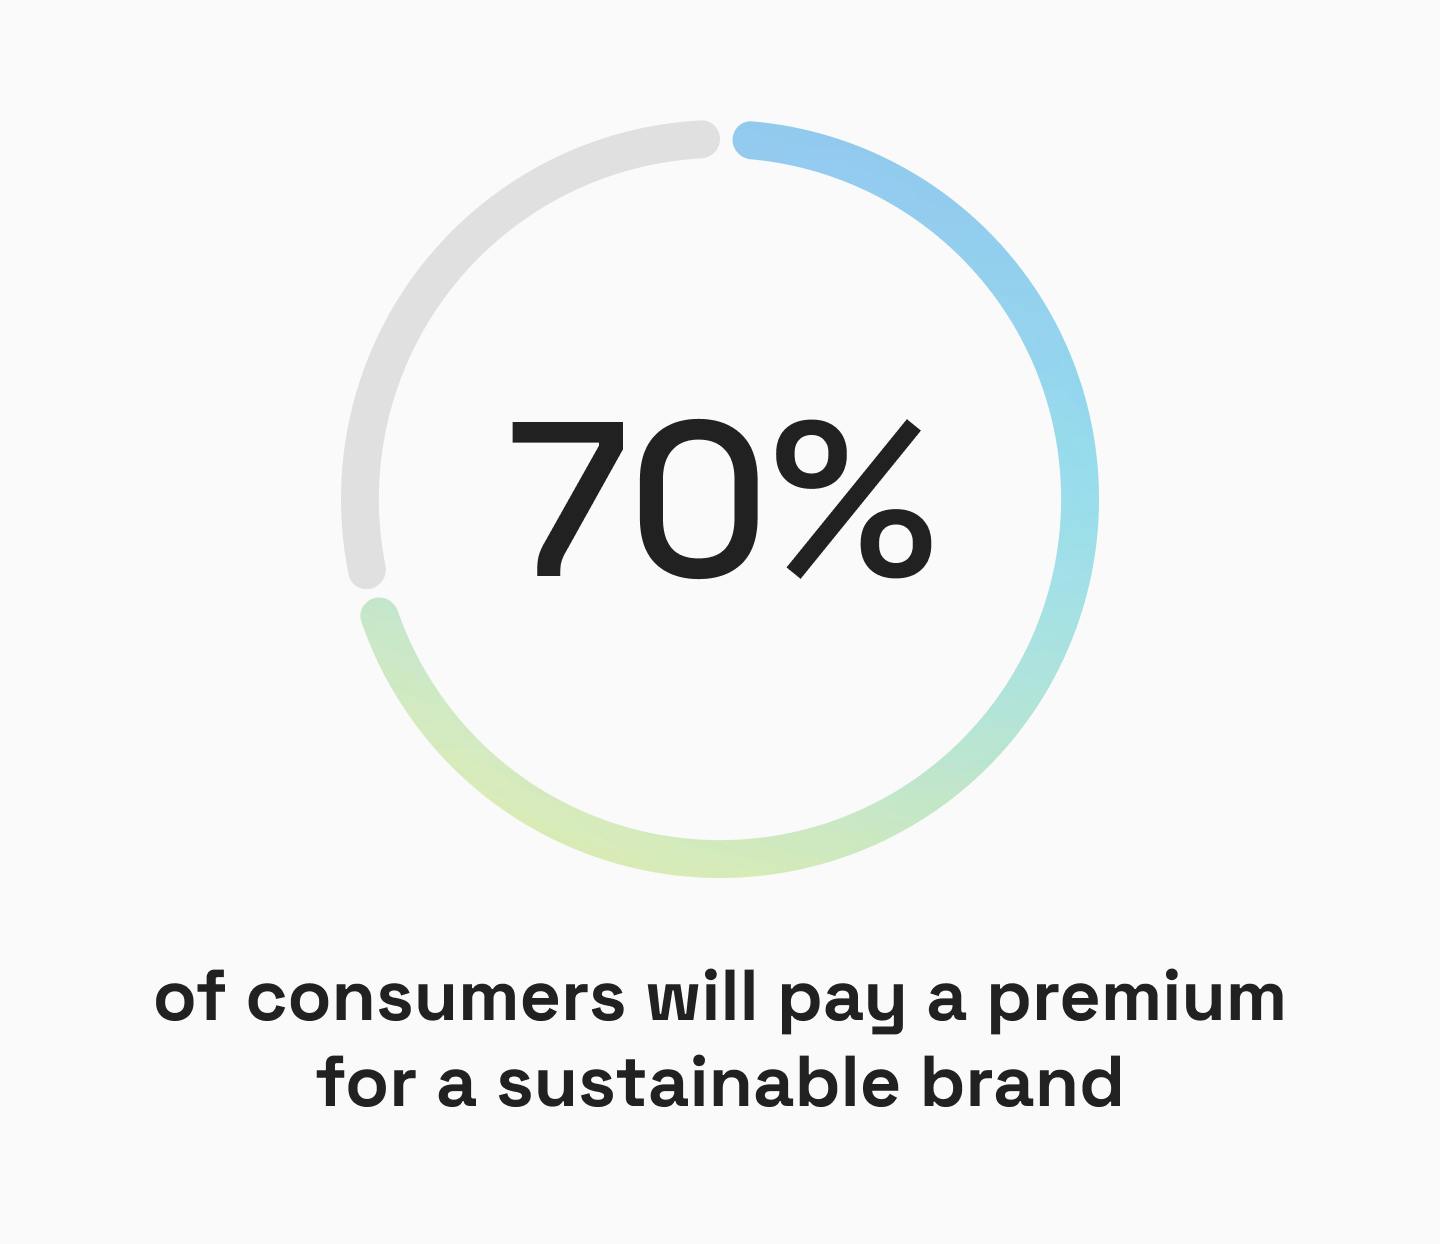 70% of consumers will pay a premium for a sustainable brand